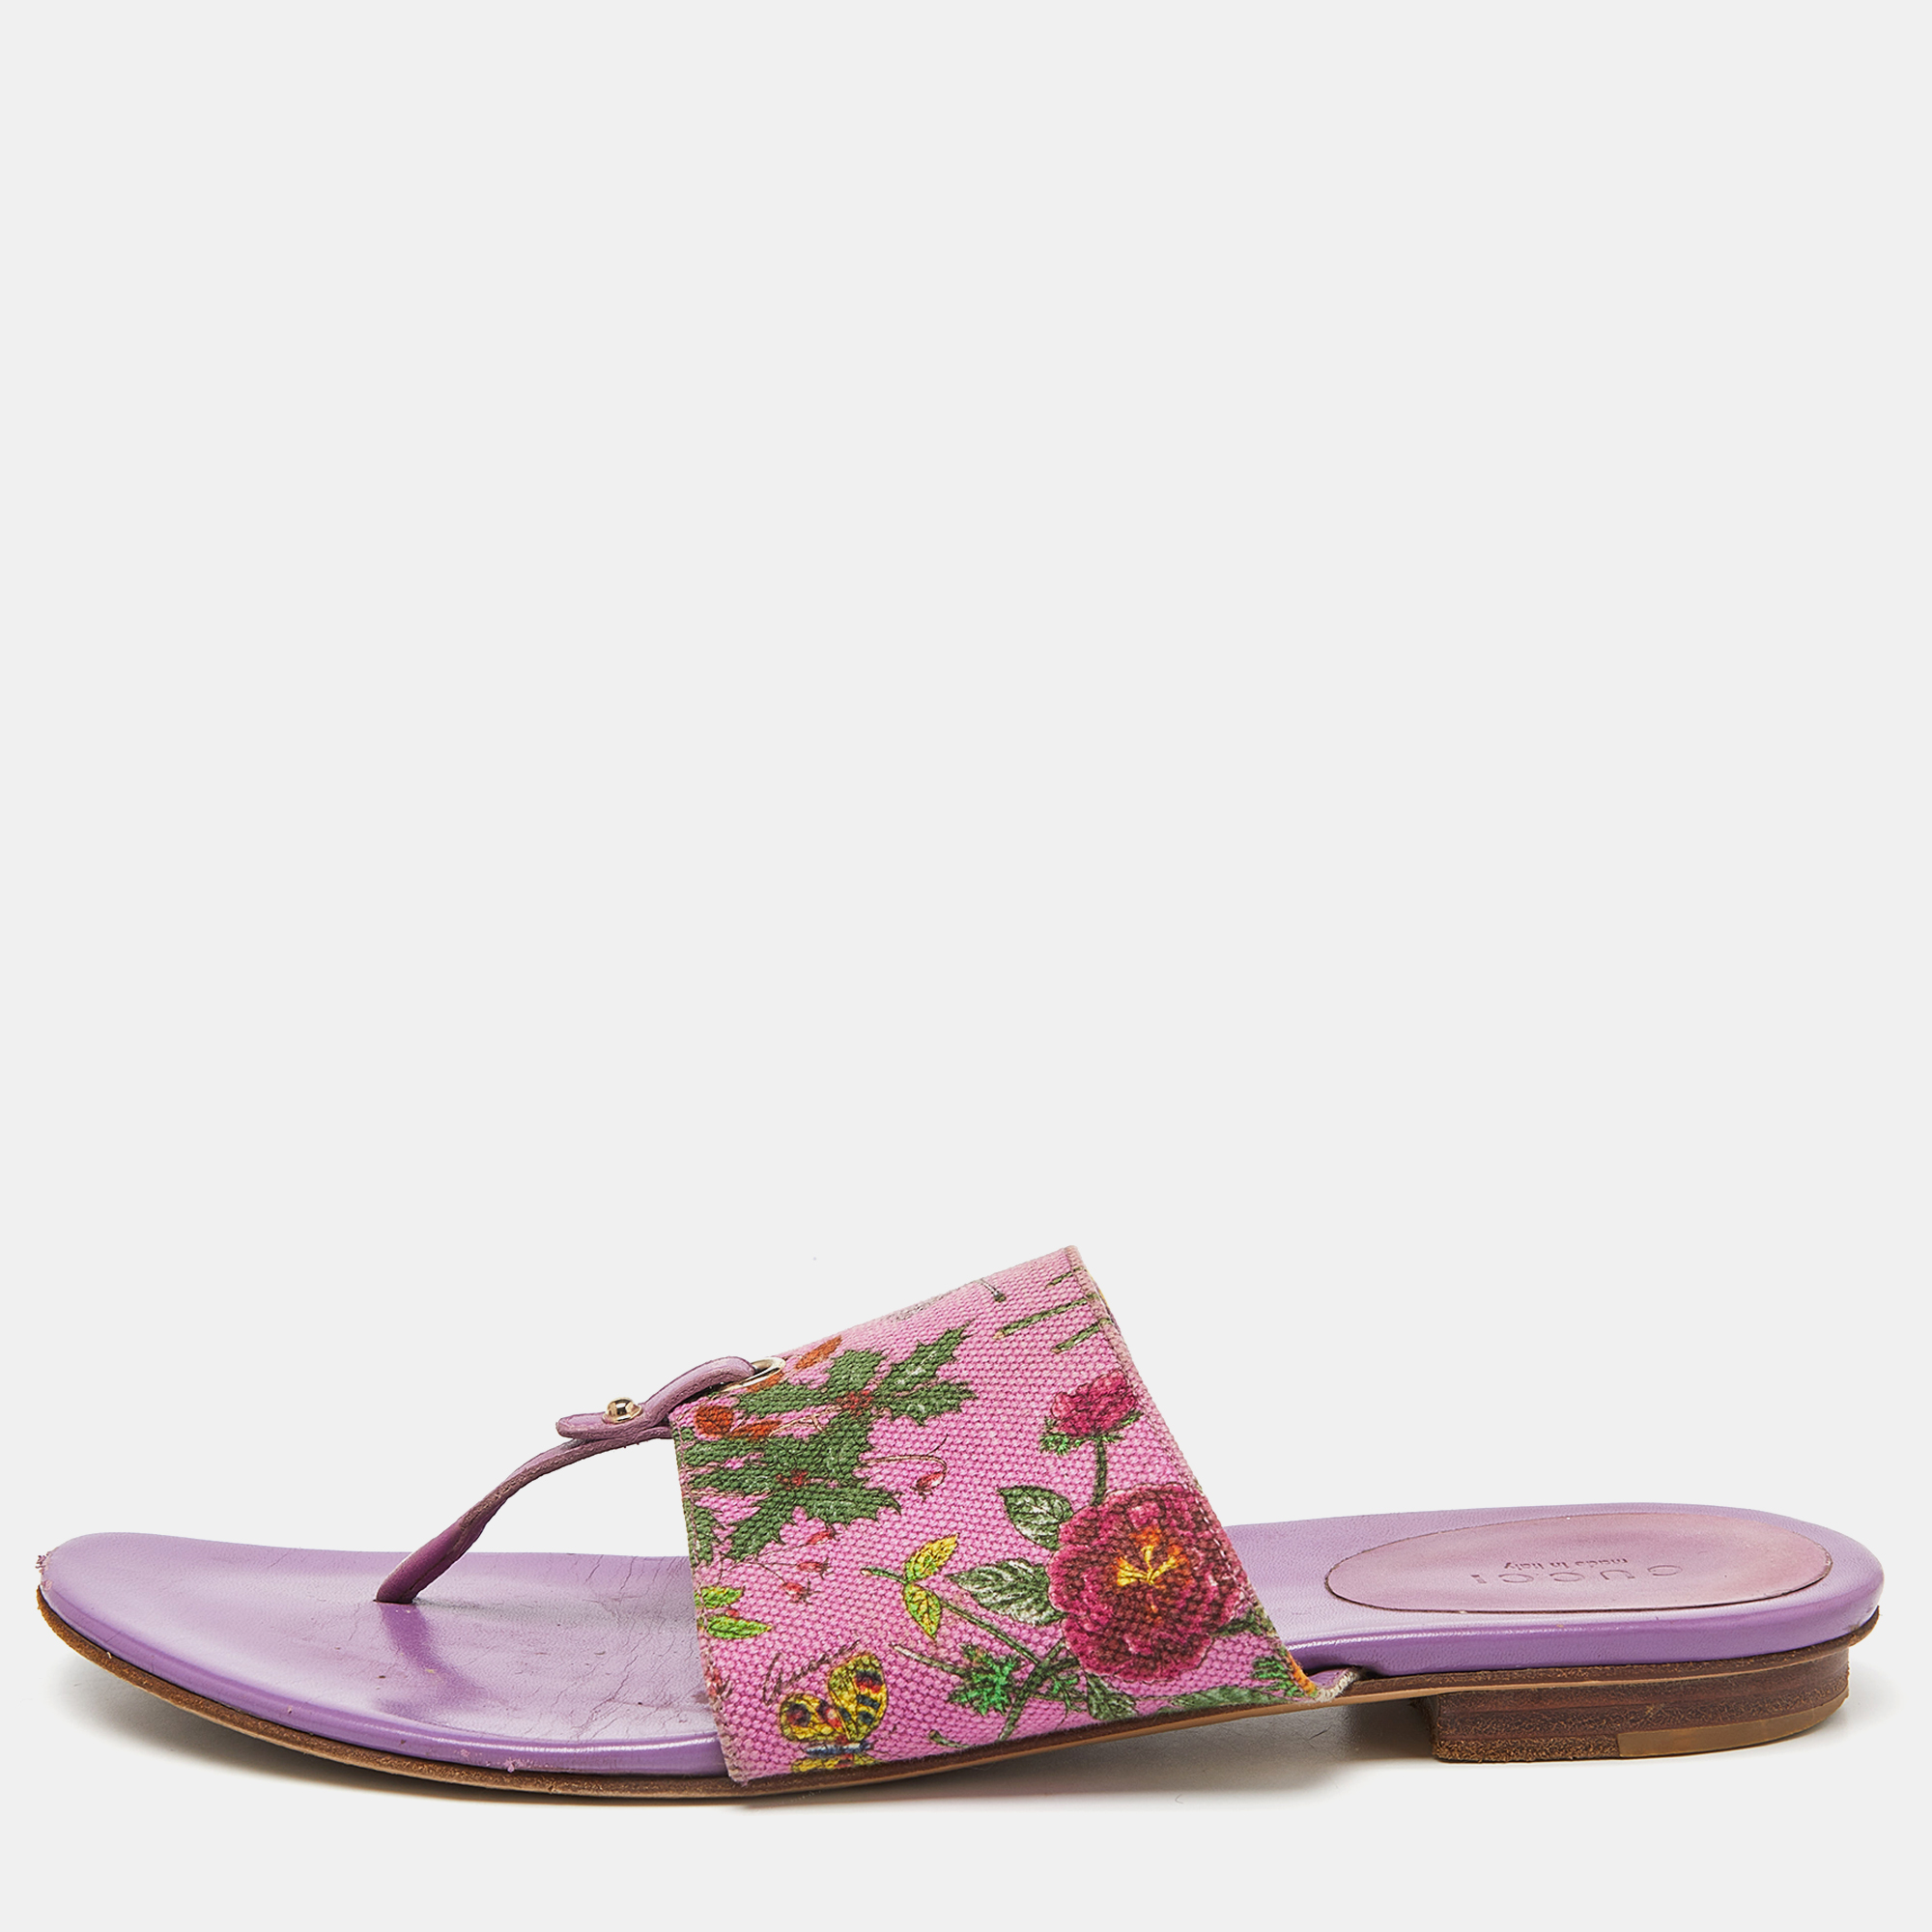 Gucci purple floral canvas and leather thong slide flats size 39.5